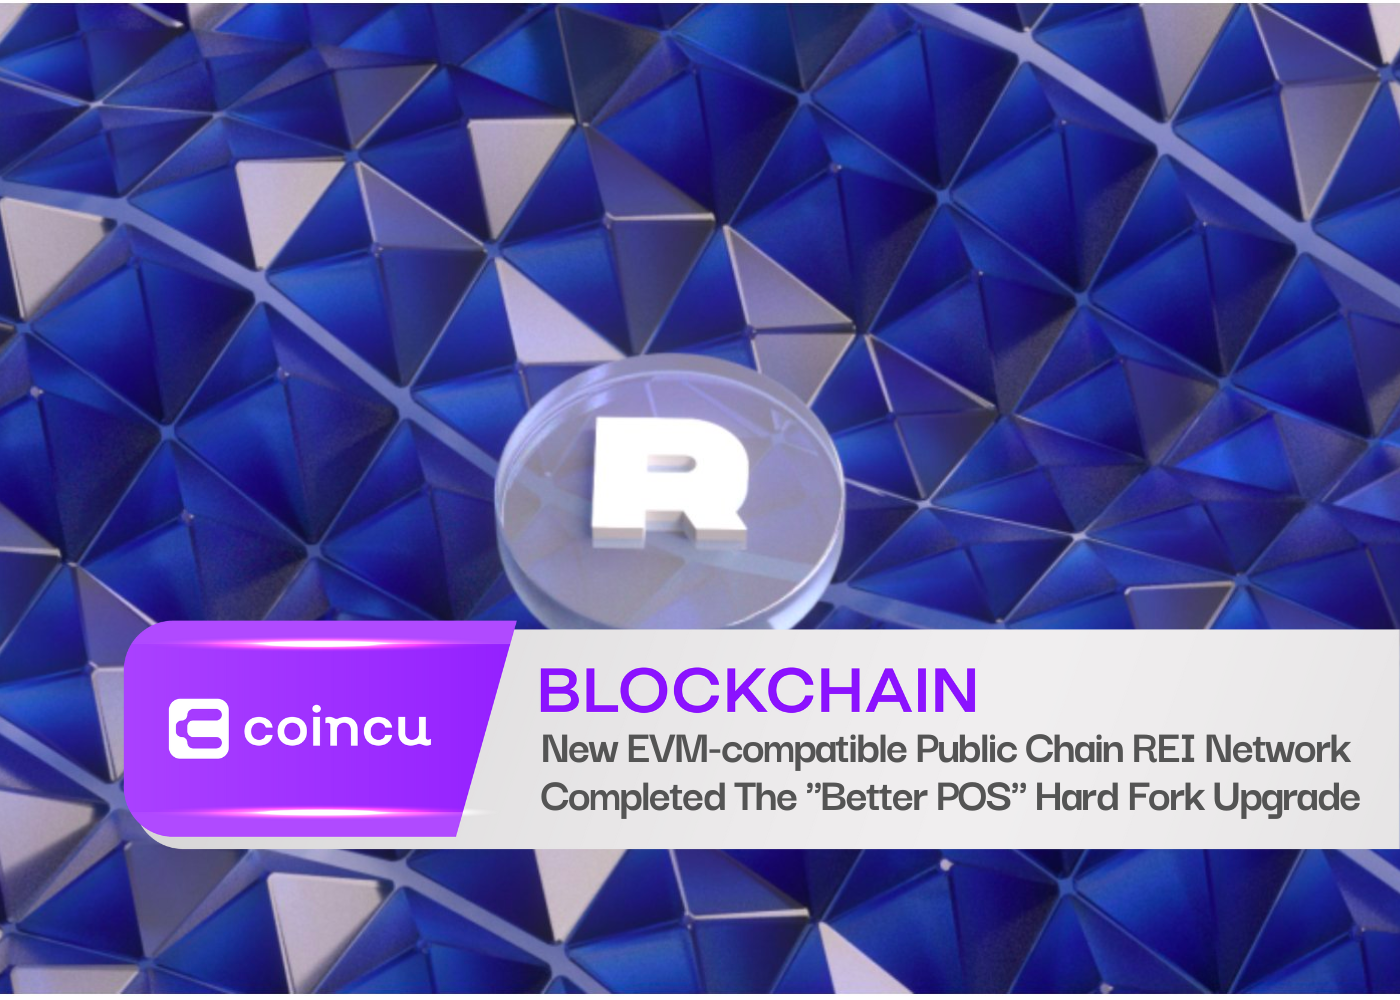 New EVM-compatible Public Chain REI Network Completed The "Better POS" Hard Fork Upgrade